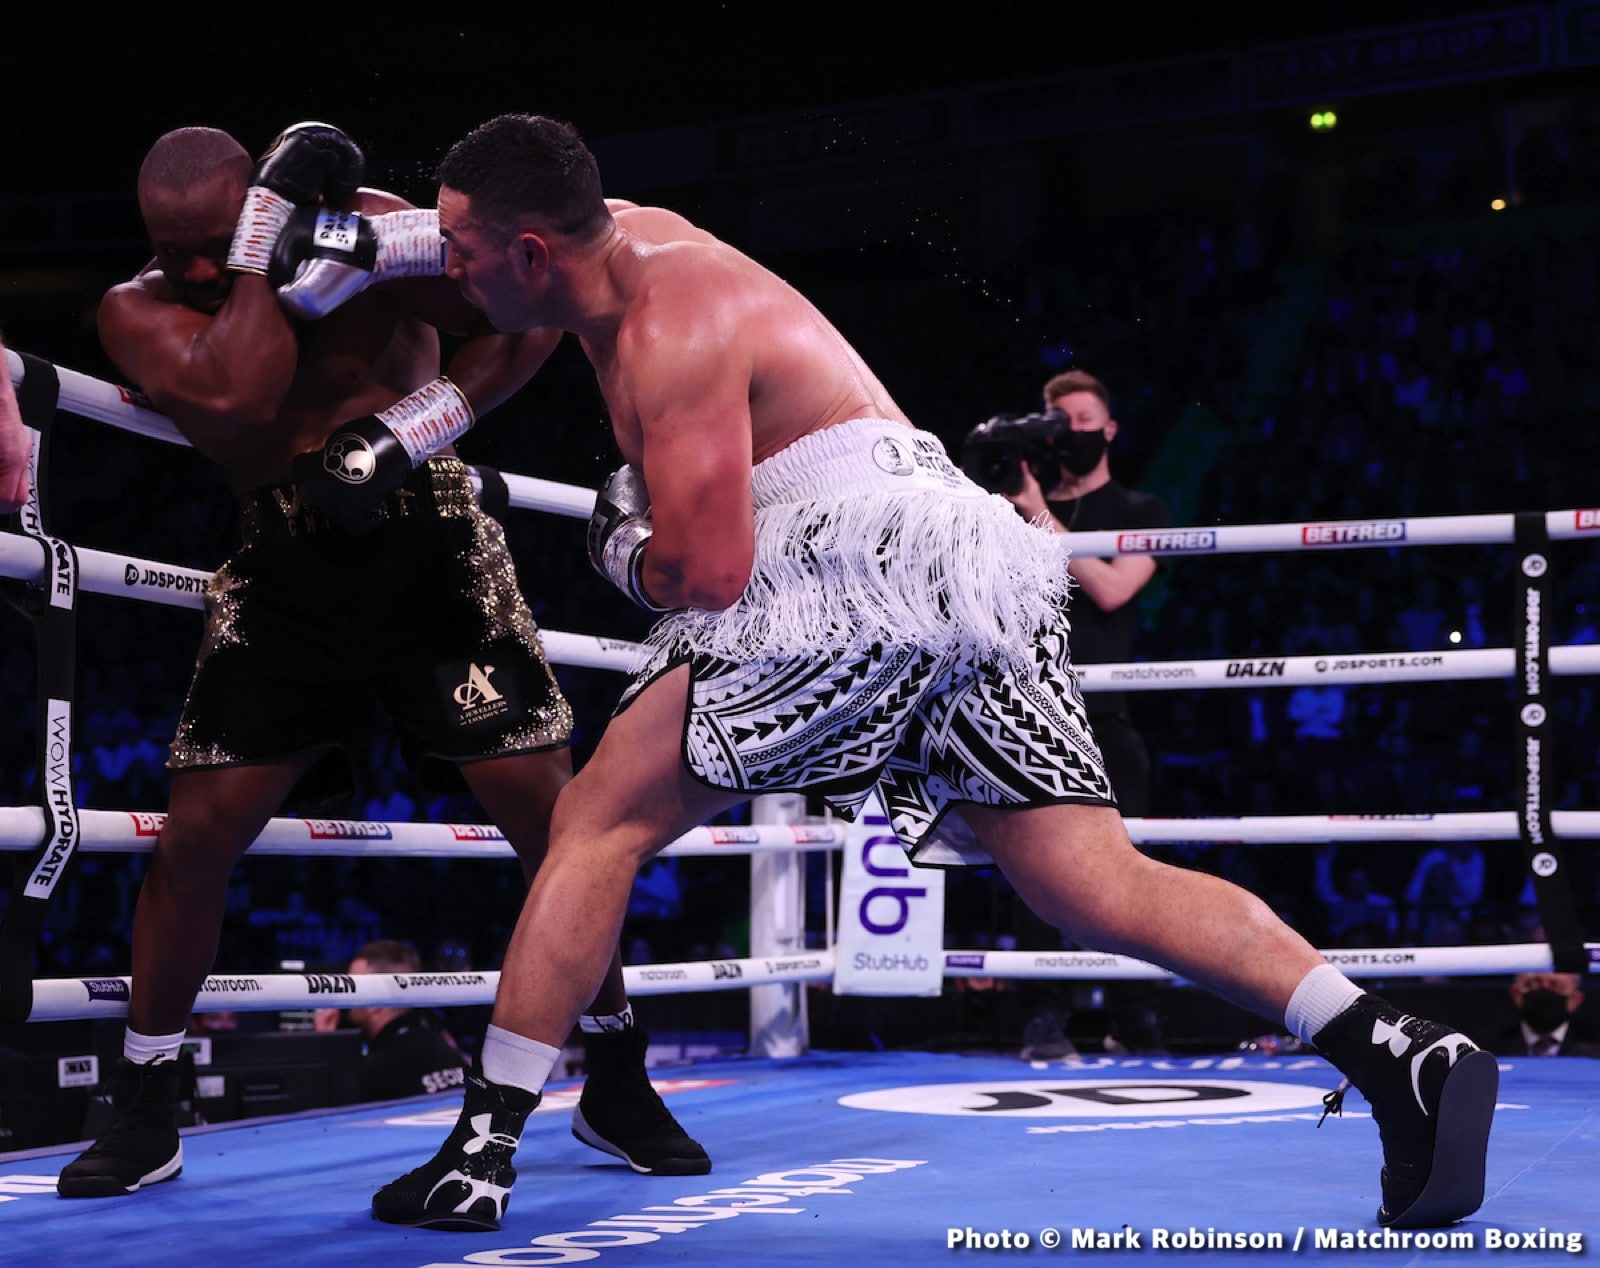 Image: Boxing Results: Joseph Parker Defeats Dereck Chisora in the UK!